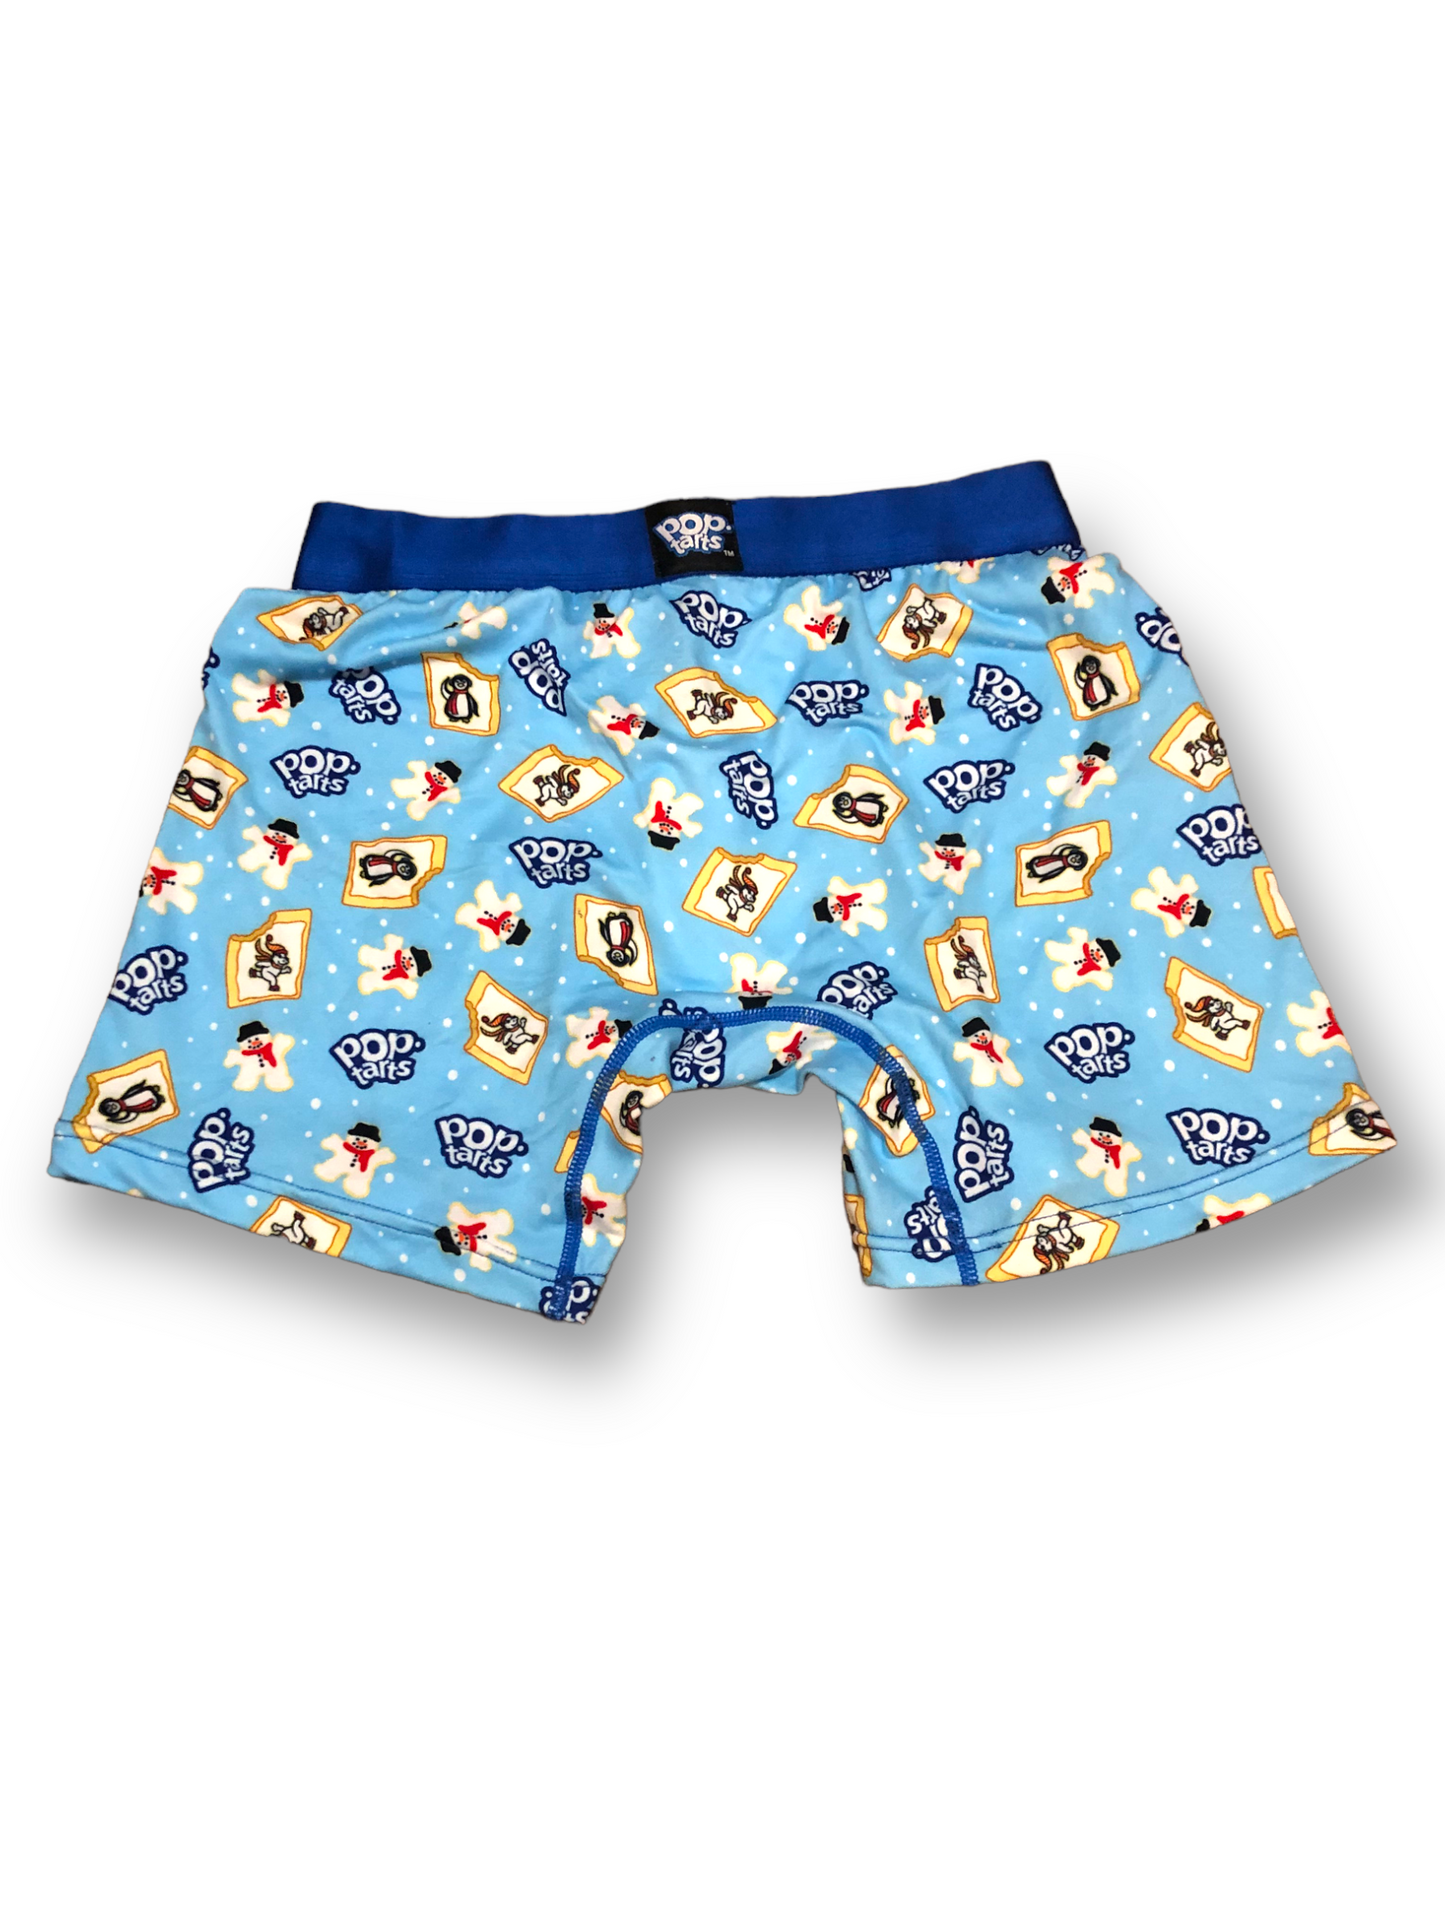 Swag Men's Pop-Tarts "Frosted Sugar Cookie" Boxer Brief (NWOT) - Small